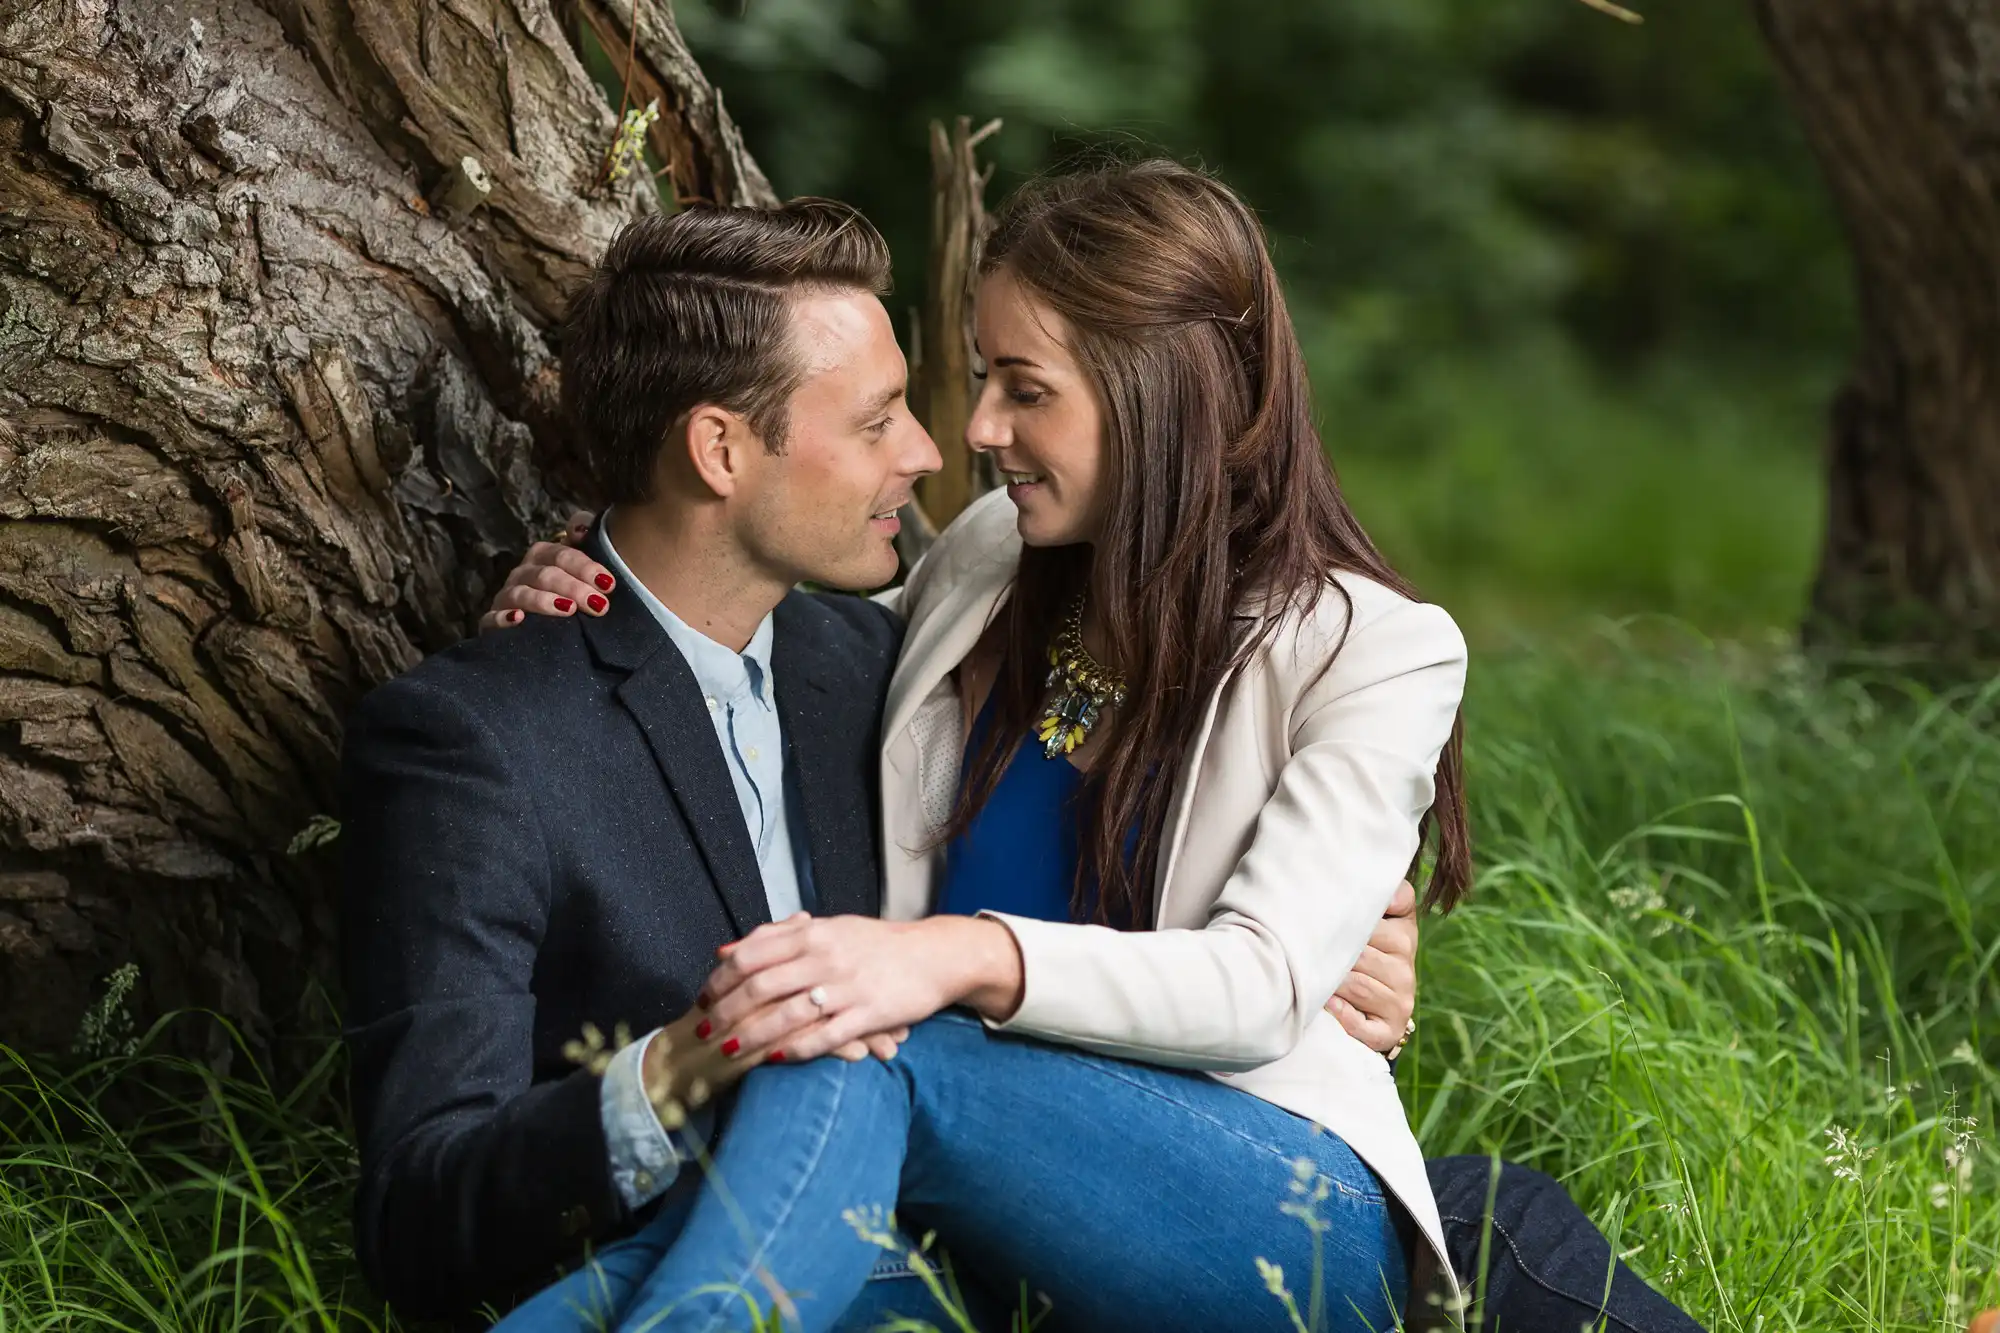 A man and a woman sitting close together by a tree, smiling and gazing into each other's eyes, surrounded by lush green grass.